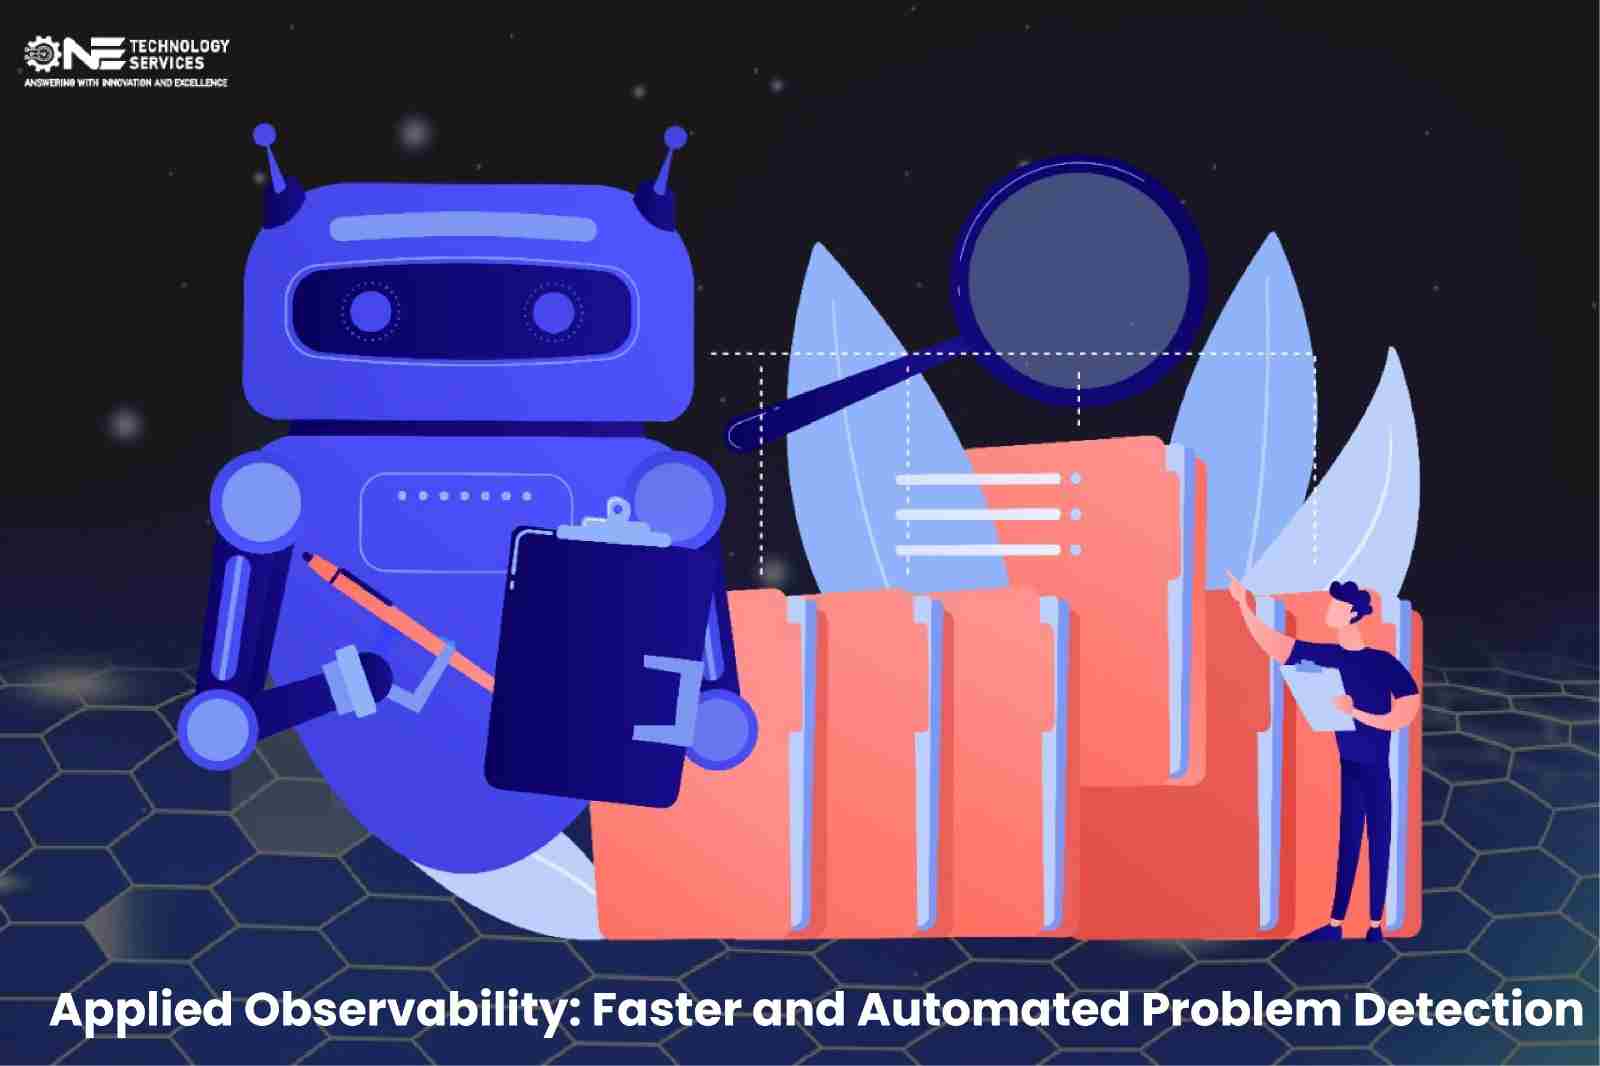 Applied Observability: Faster and Automated Problem Detection